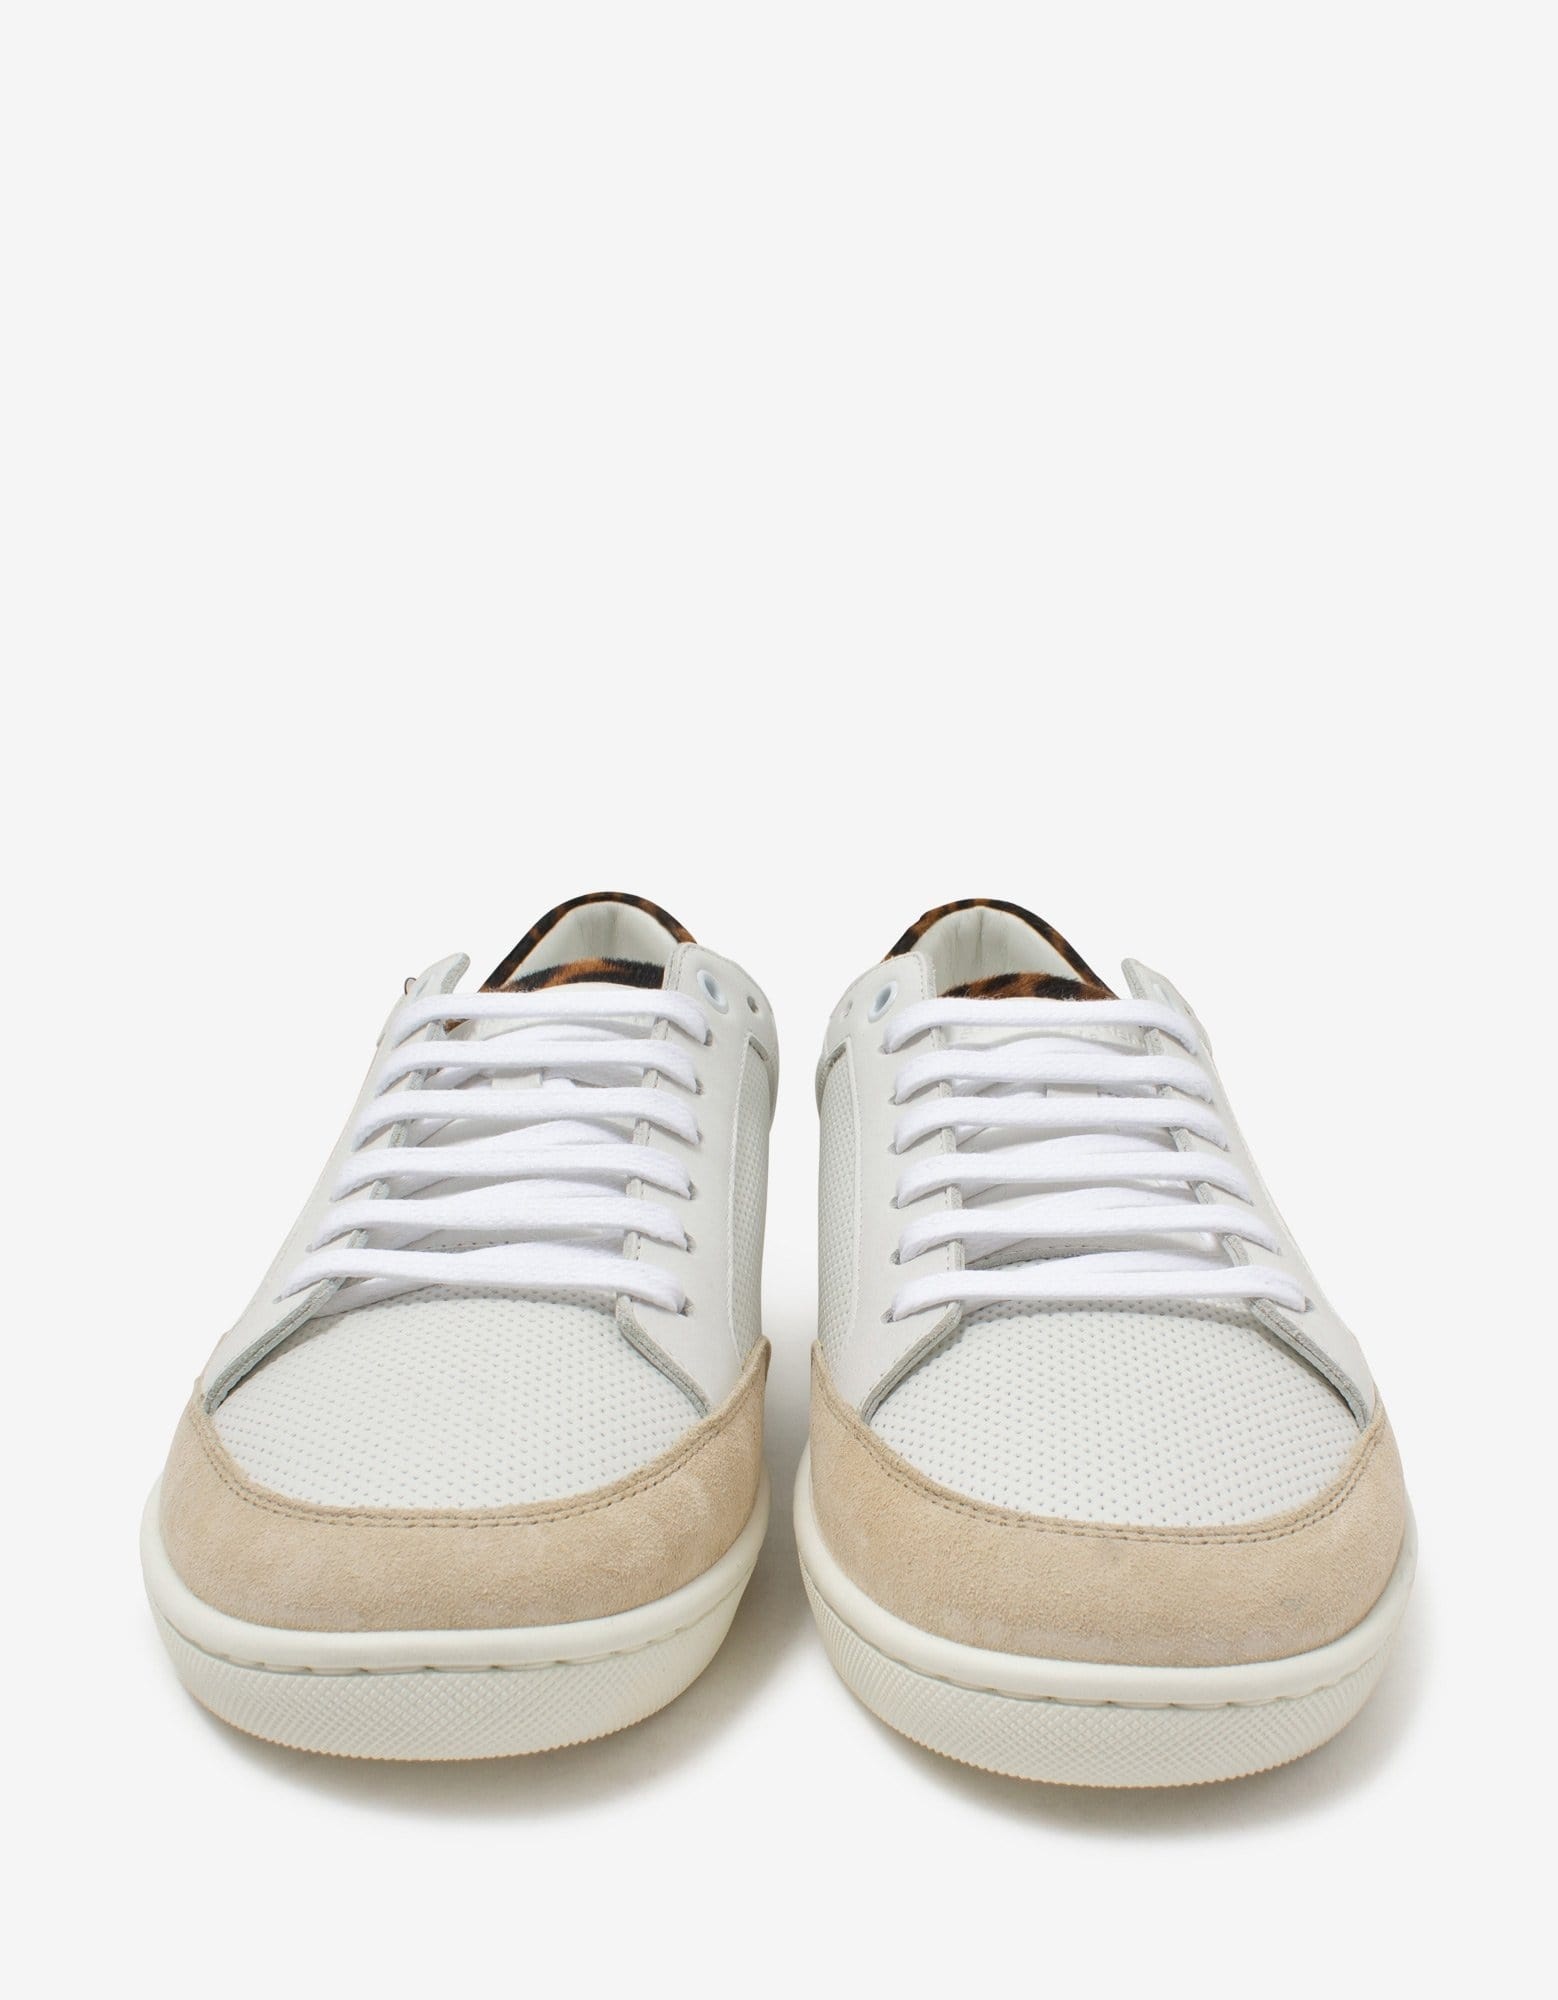 Court Classic SL/10 White Perforated Leather Trainers - 5